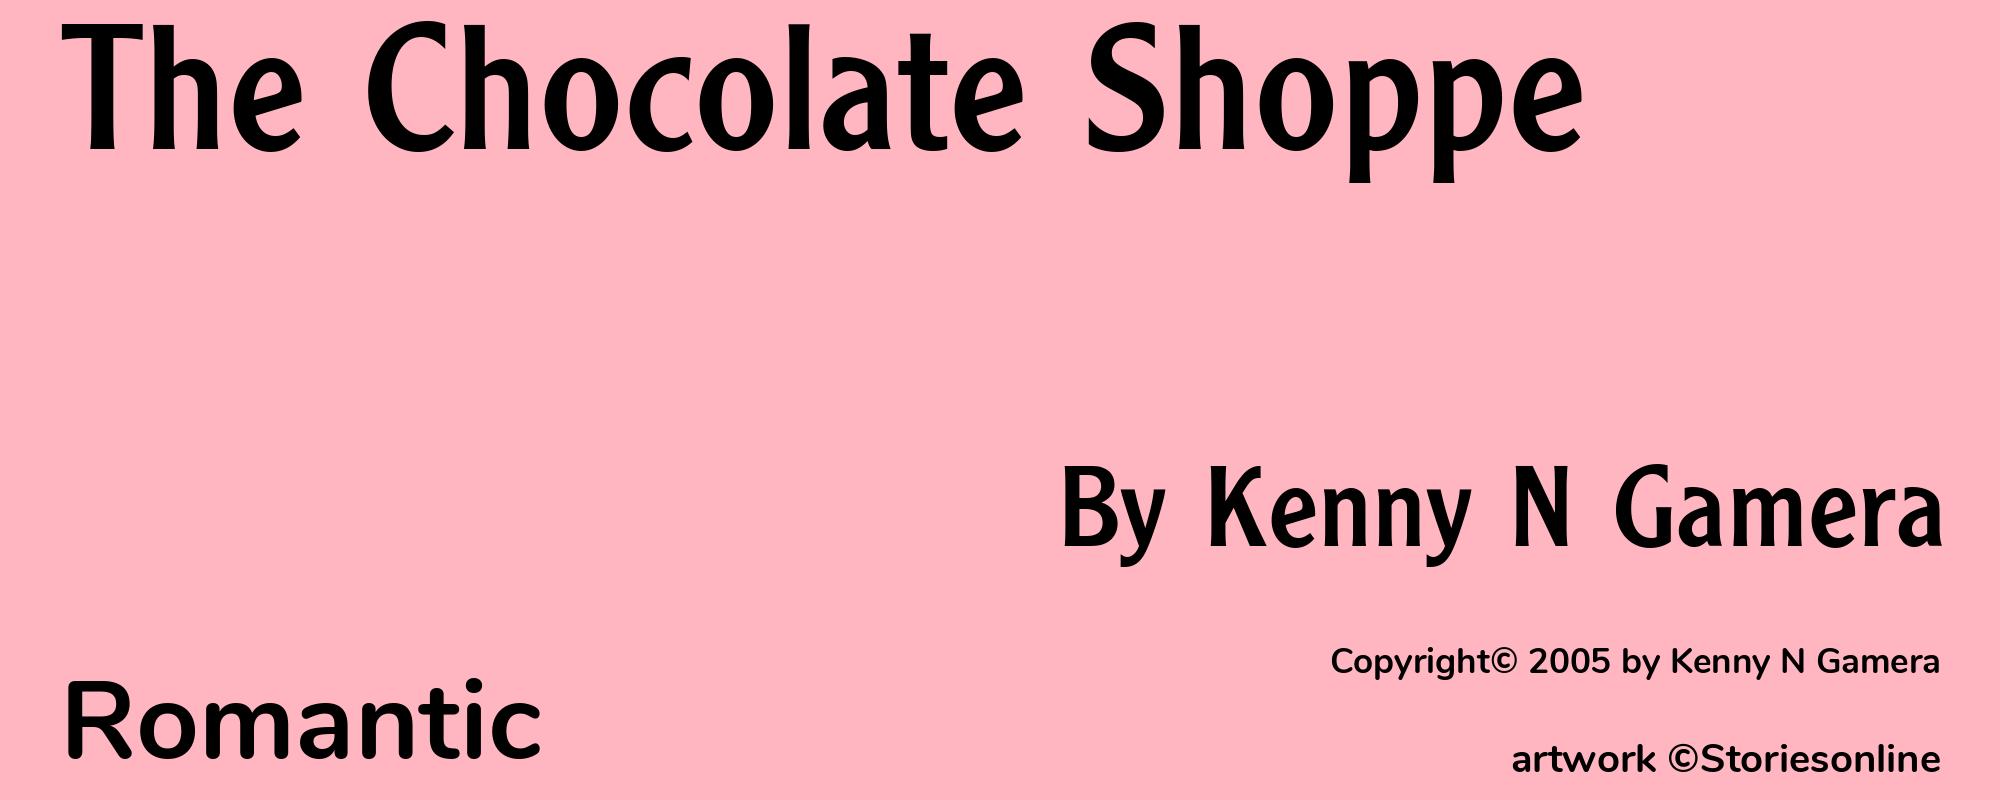 The Chocolate Shoppe - Cover